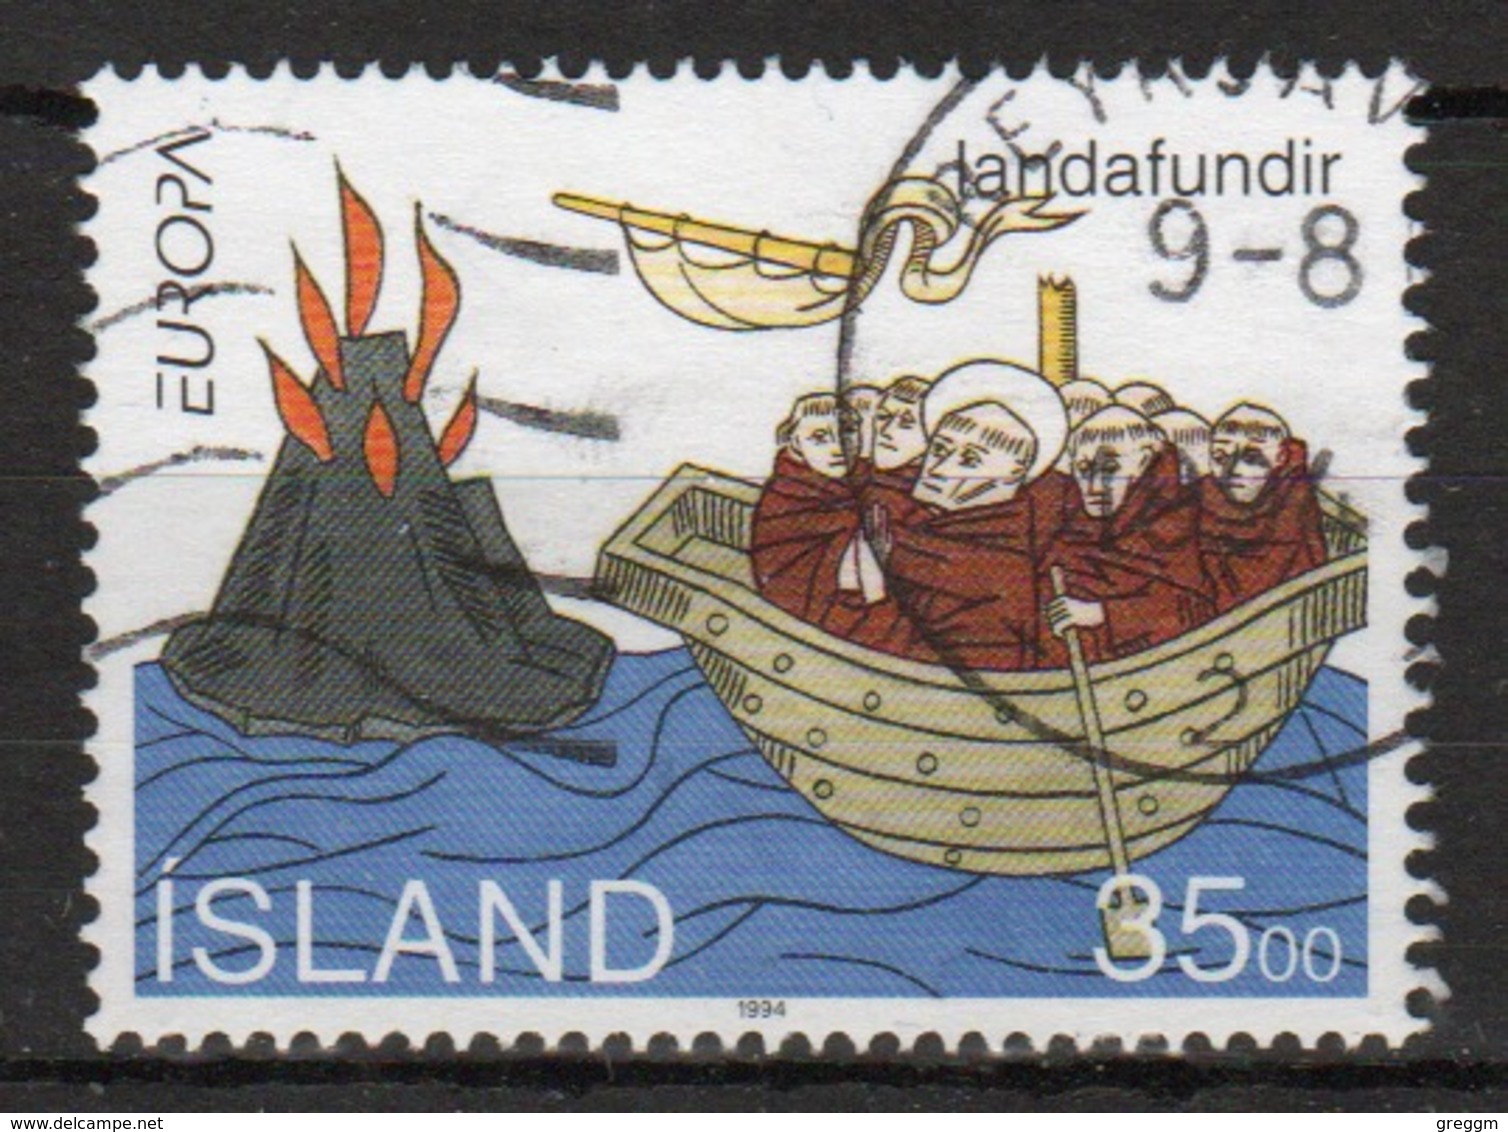 Iceland 1994 Single 35k Stamp From The Europa St Brendans Voyages Set. - Used Stamps